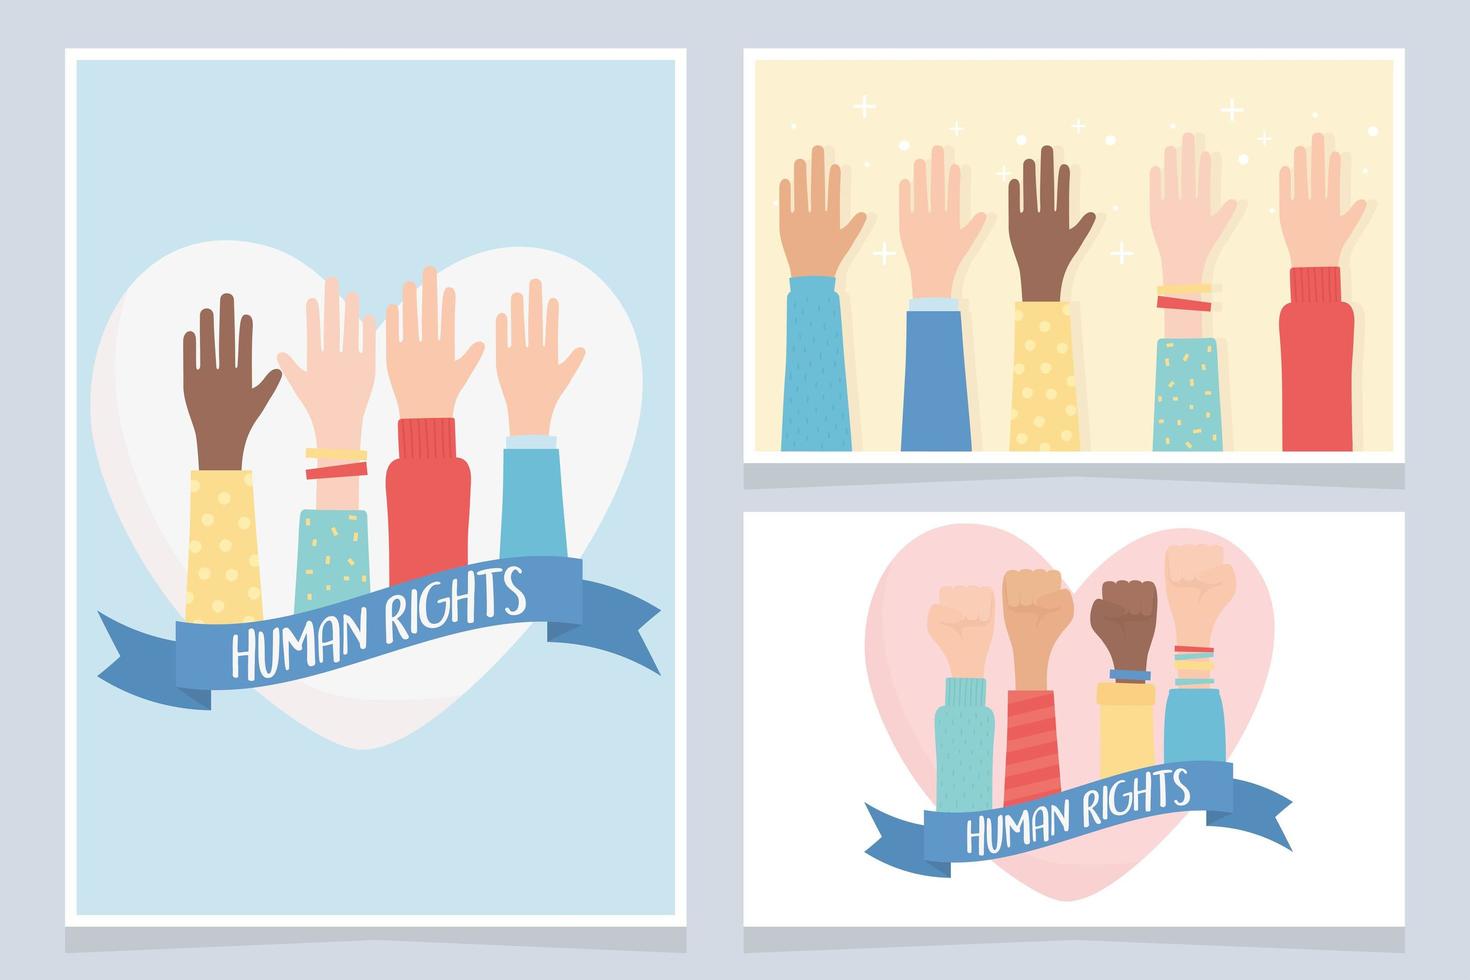 human rights, together community hands cards vector